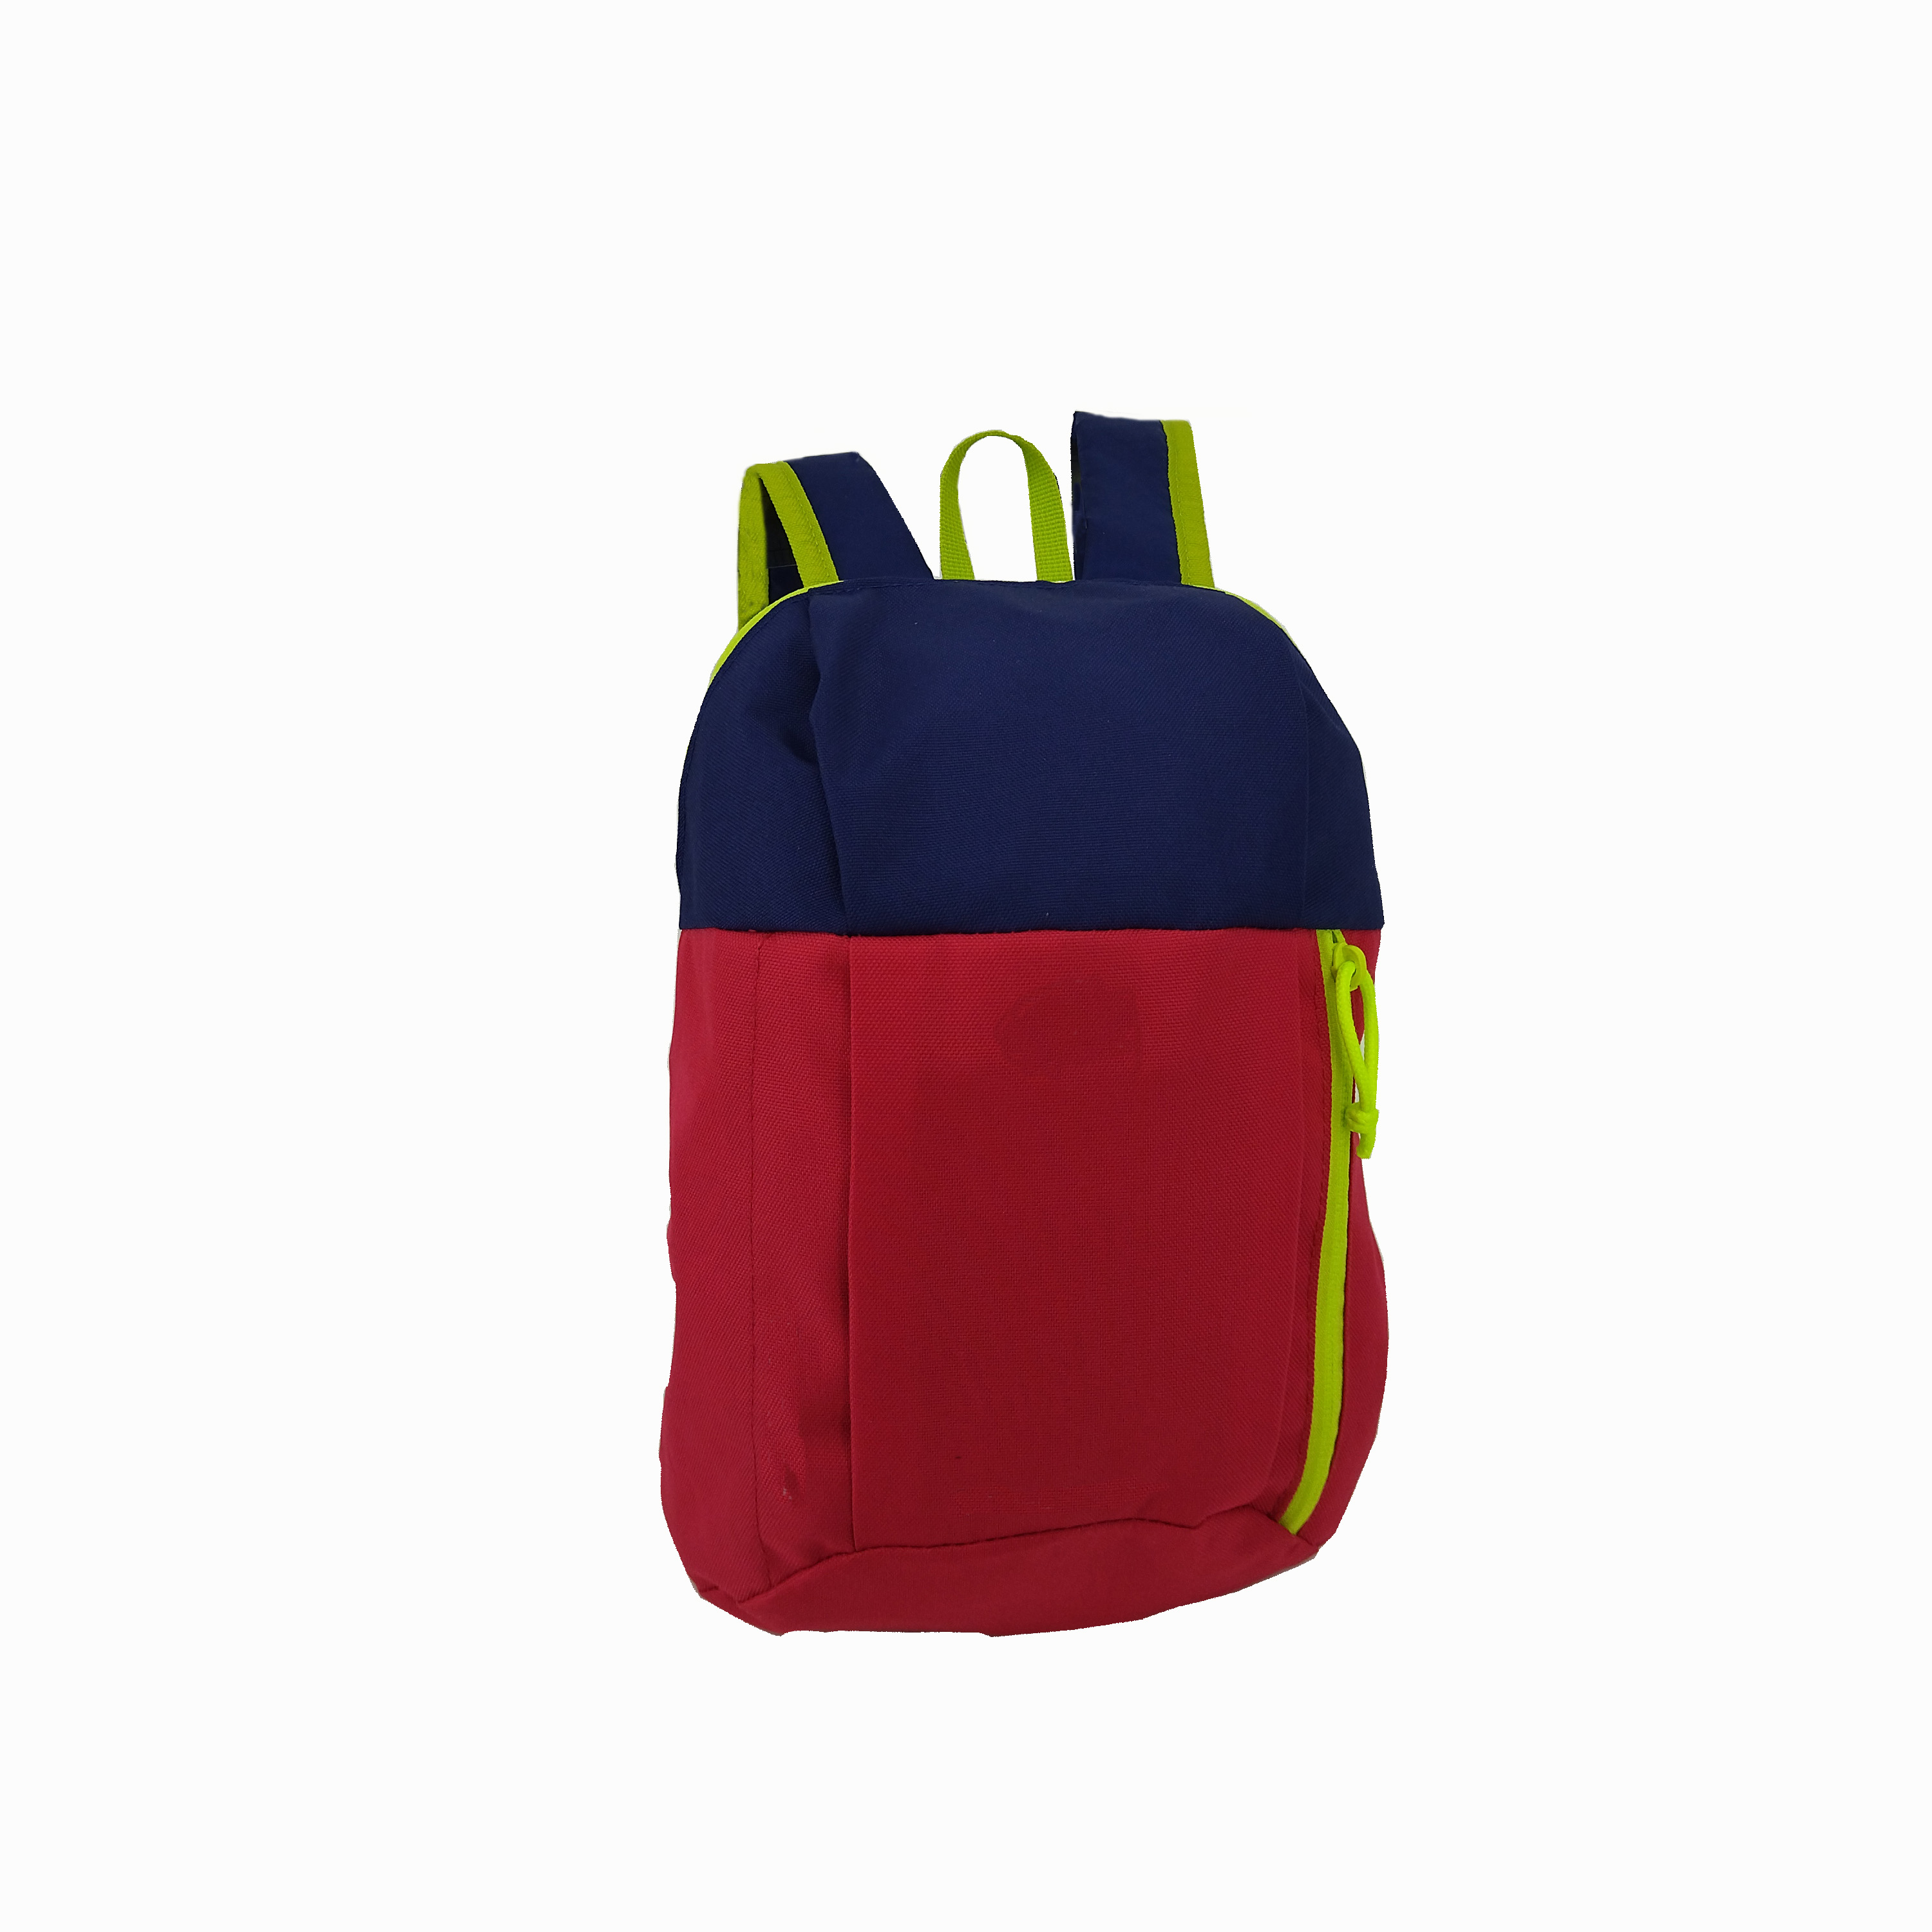 leisure bag/ligh weight backpack/promotional backpack/kids backpack/kids ourdoor backpack/